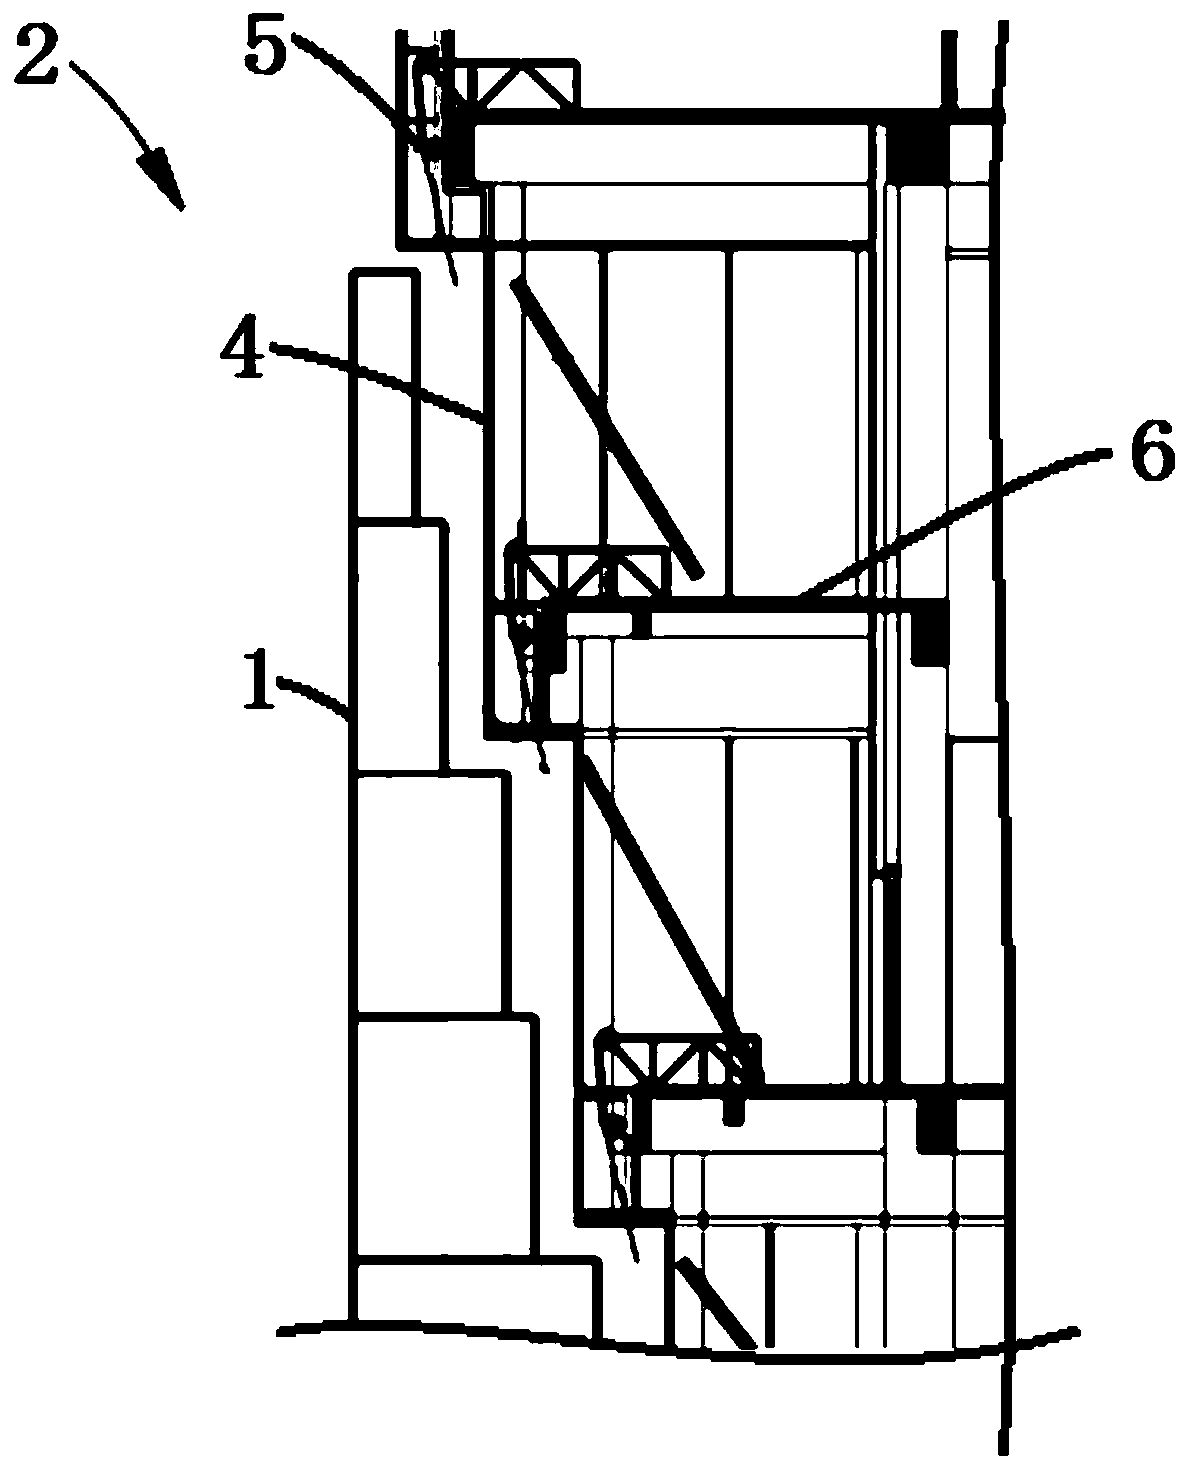 Stepped set-back model large glass curtain wall construction method